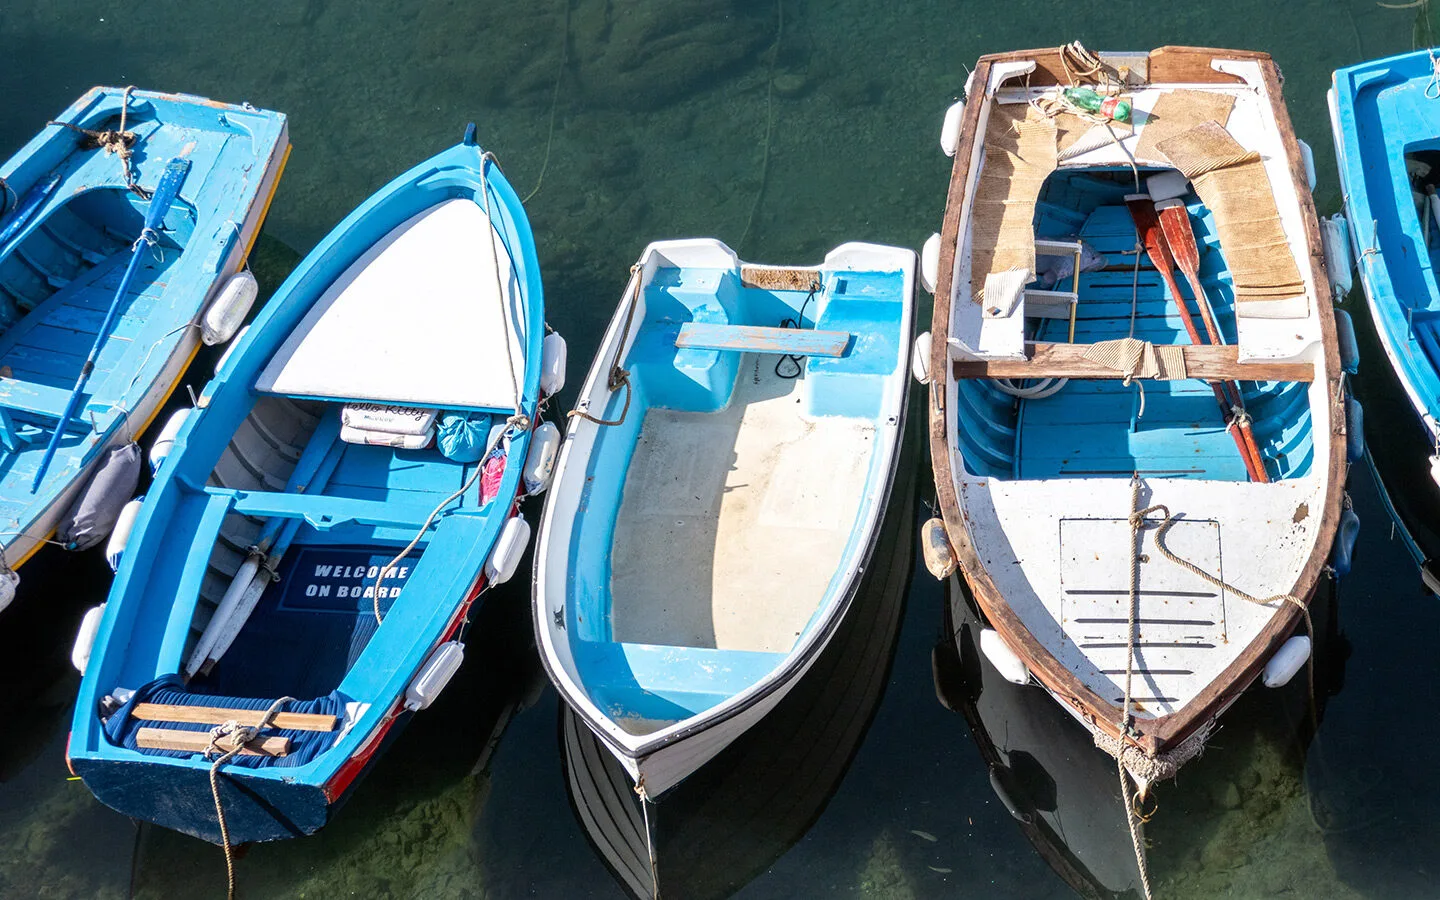 Small boats in the harbour at Marina Corricella in Procida